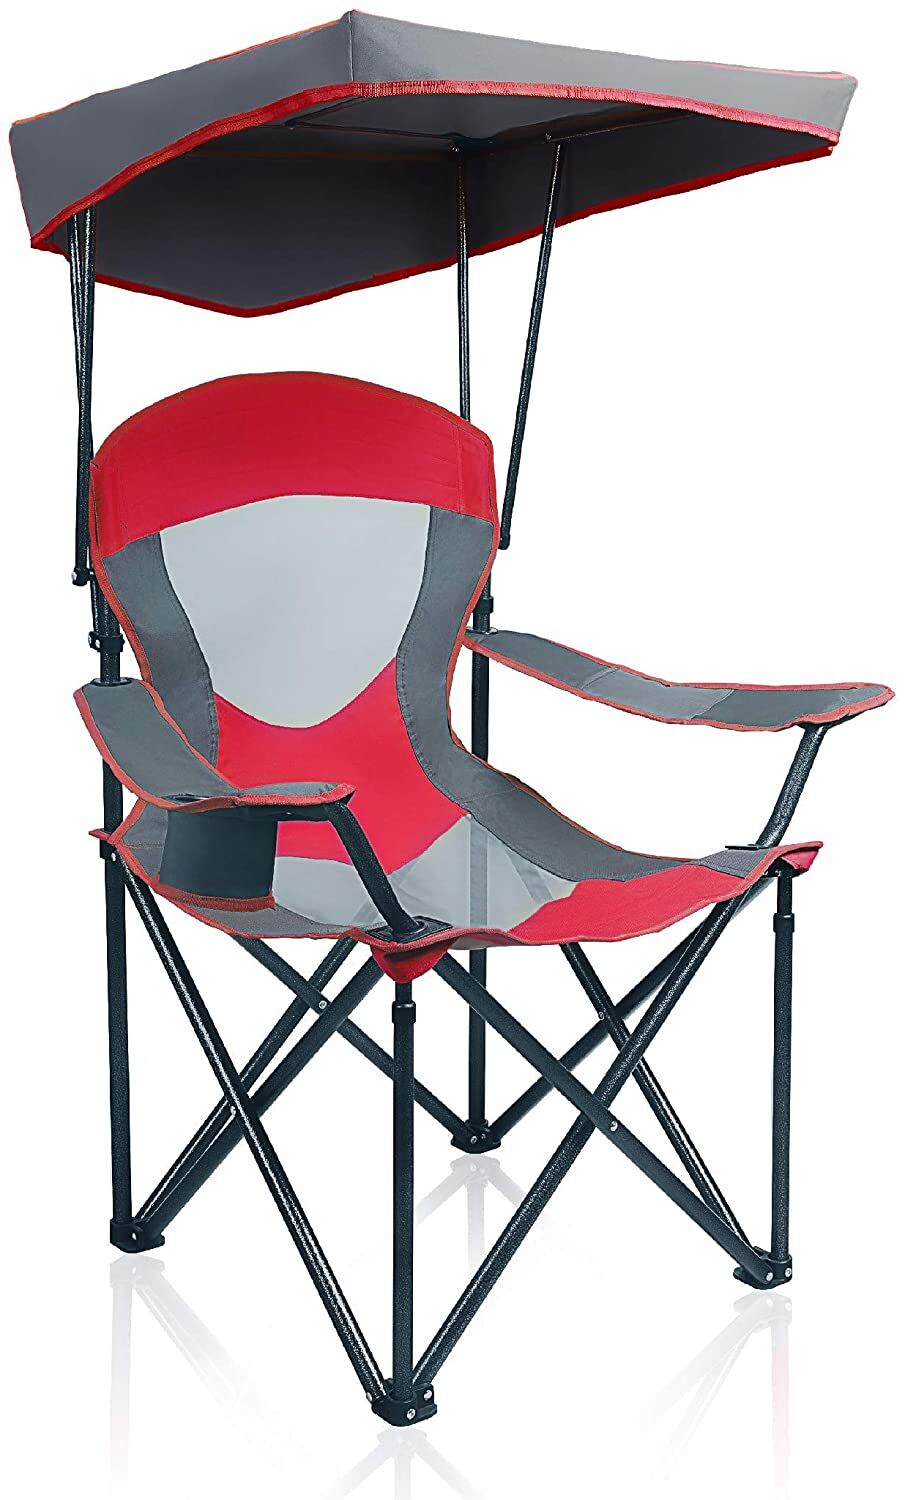 Alpha Camp folding chair with shade